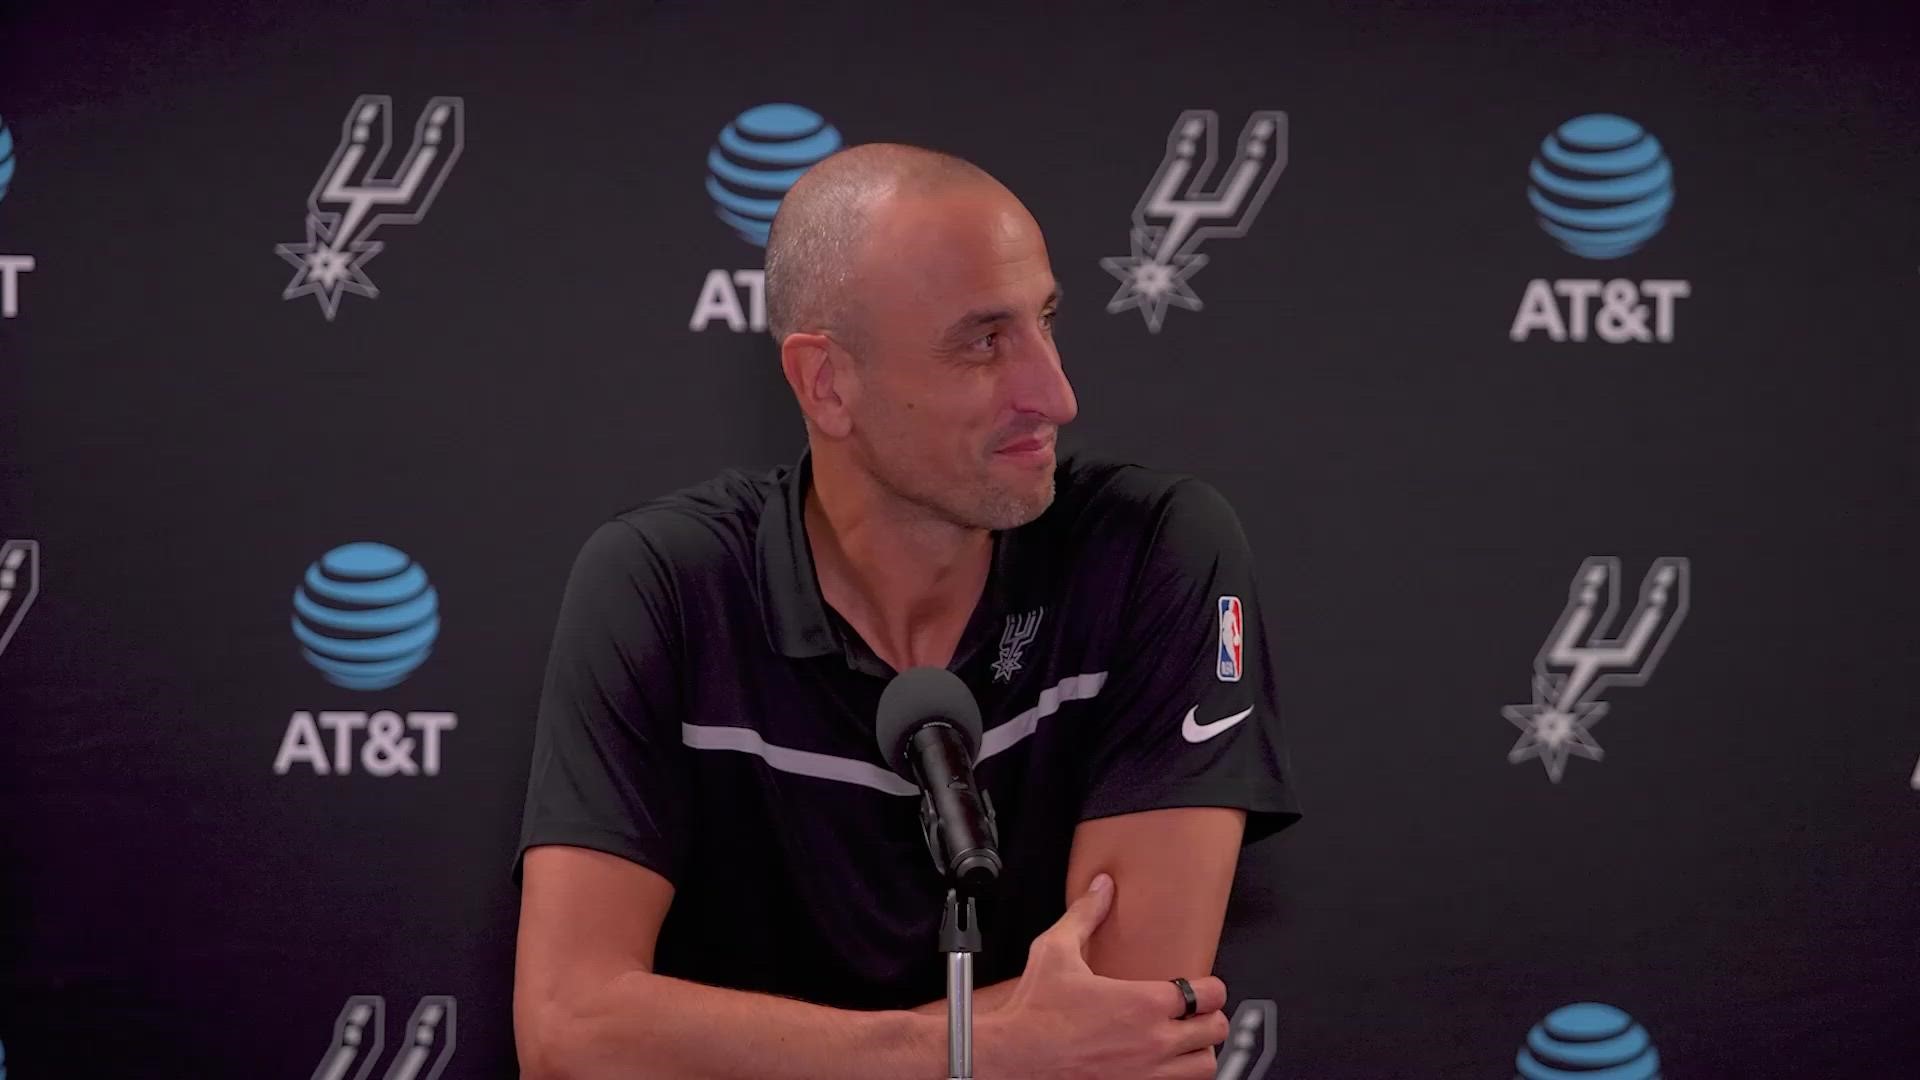 Ginobili said his family is at home here, and thanked the fans for all their support throughout the years.